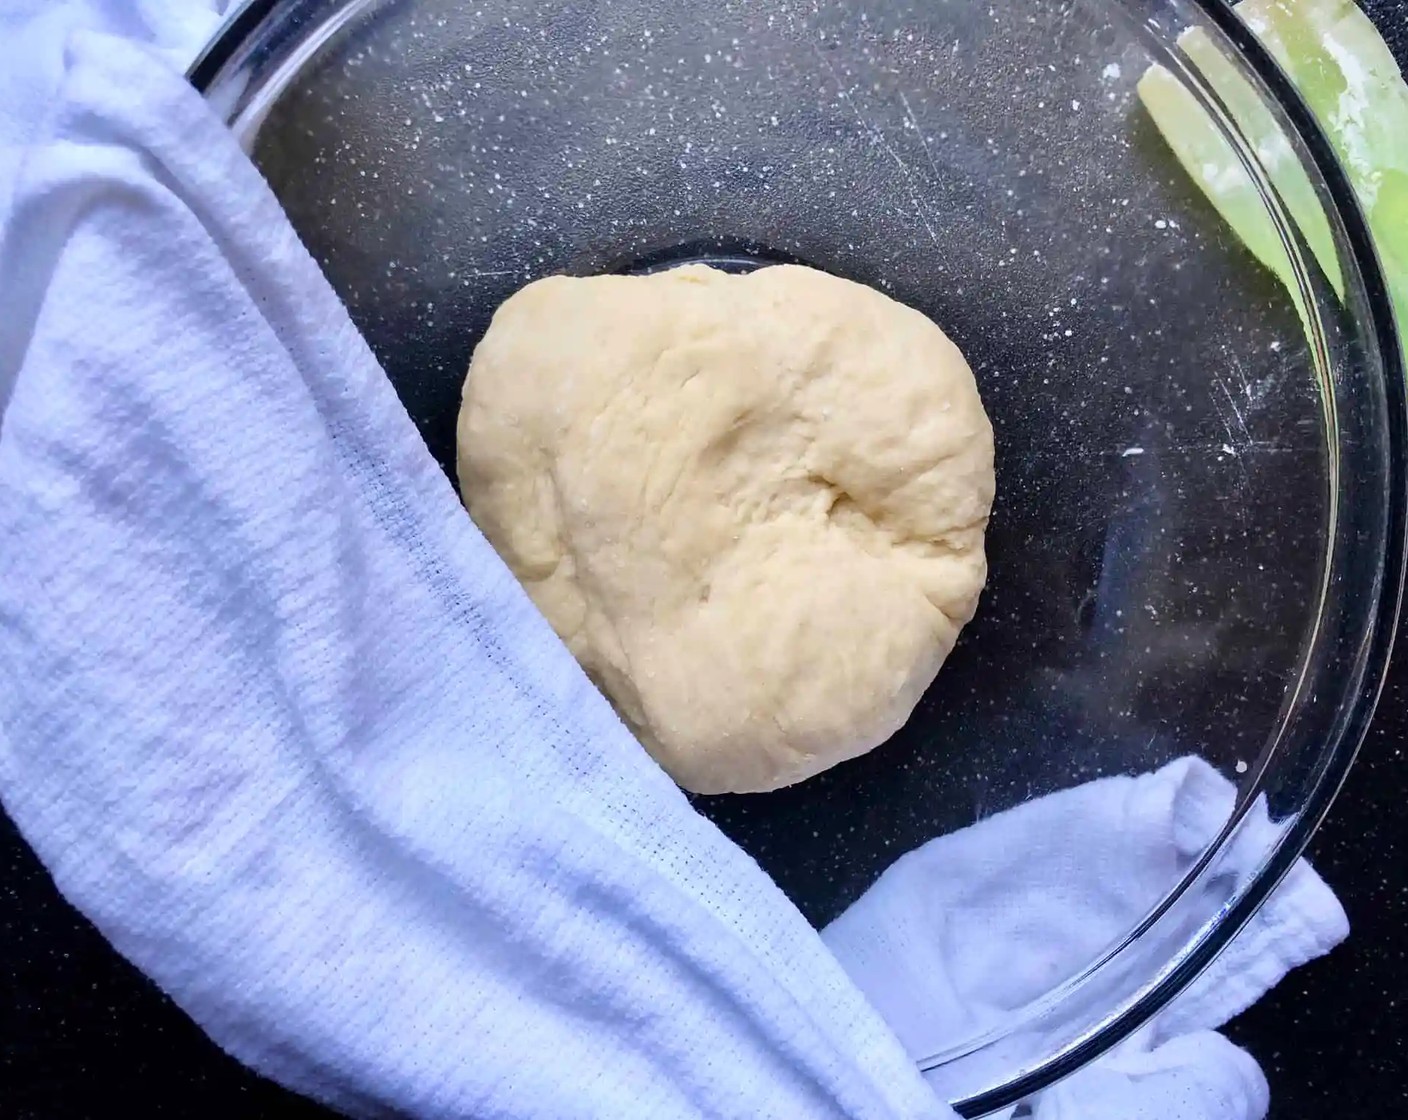 step 5 Cover the dough with a damp towel and let it rest for about 1 hour. Letting the dough rest will make it easier to roll thin wrappers.